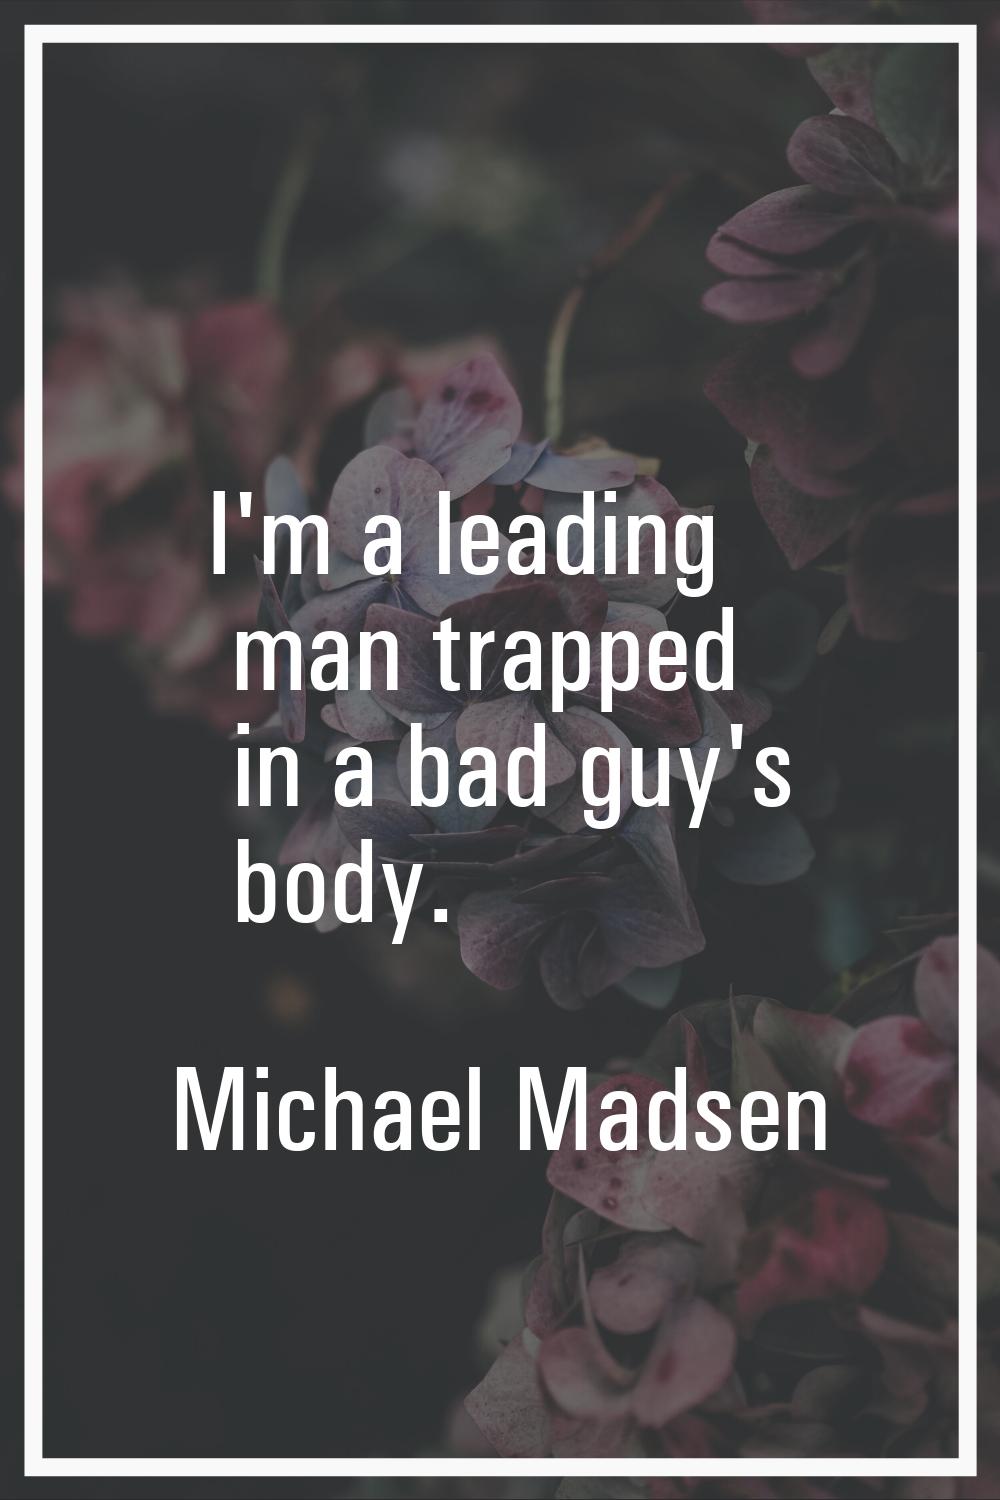 I'm a leading man trapped in a bad guy's body.